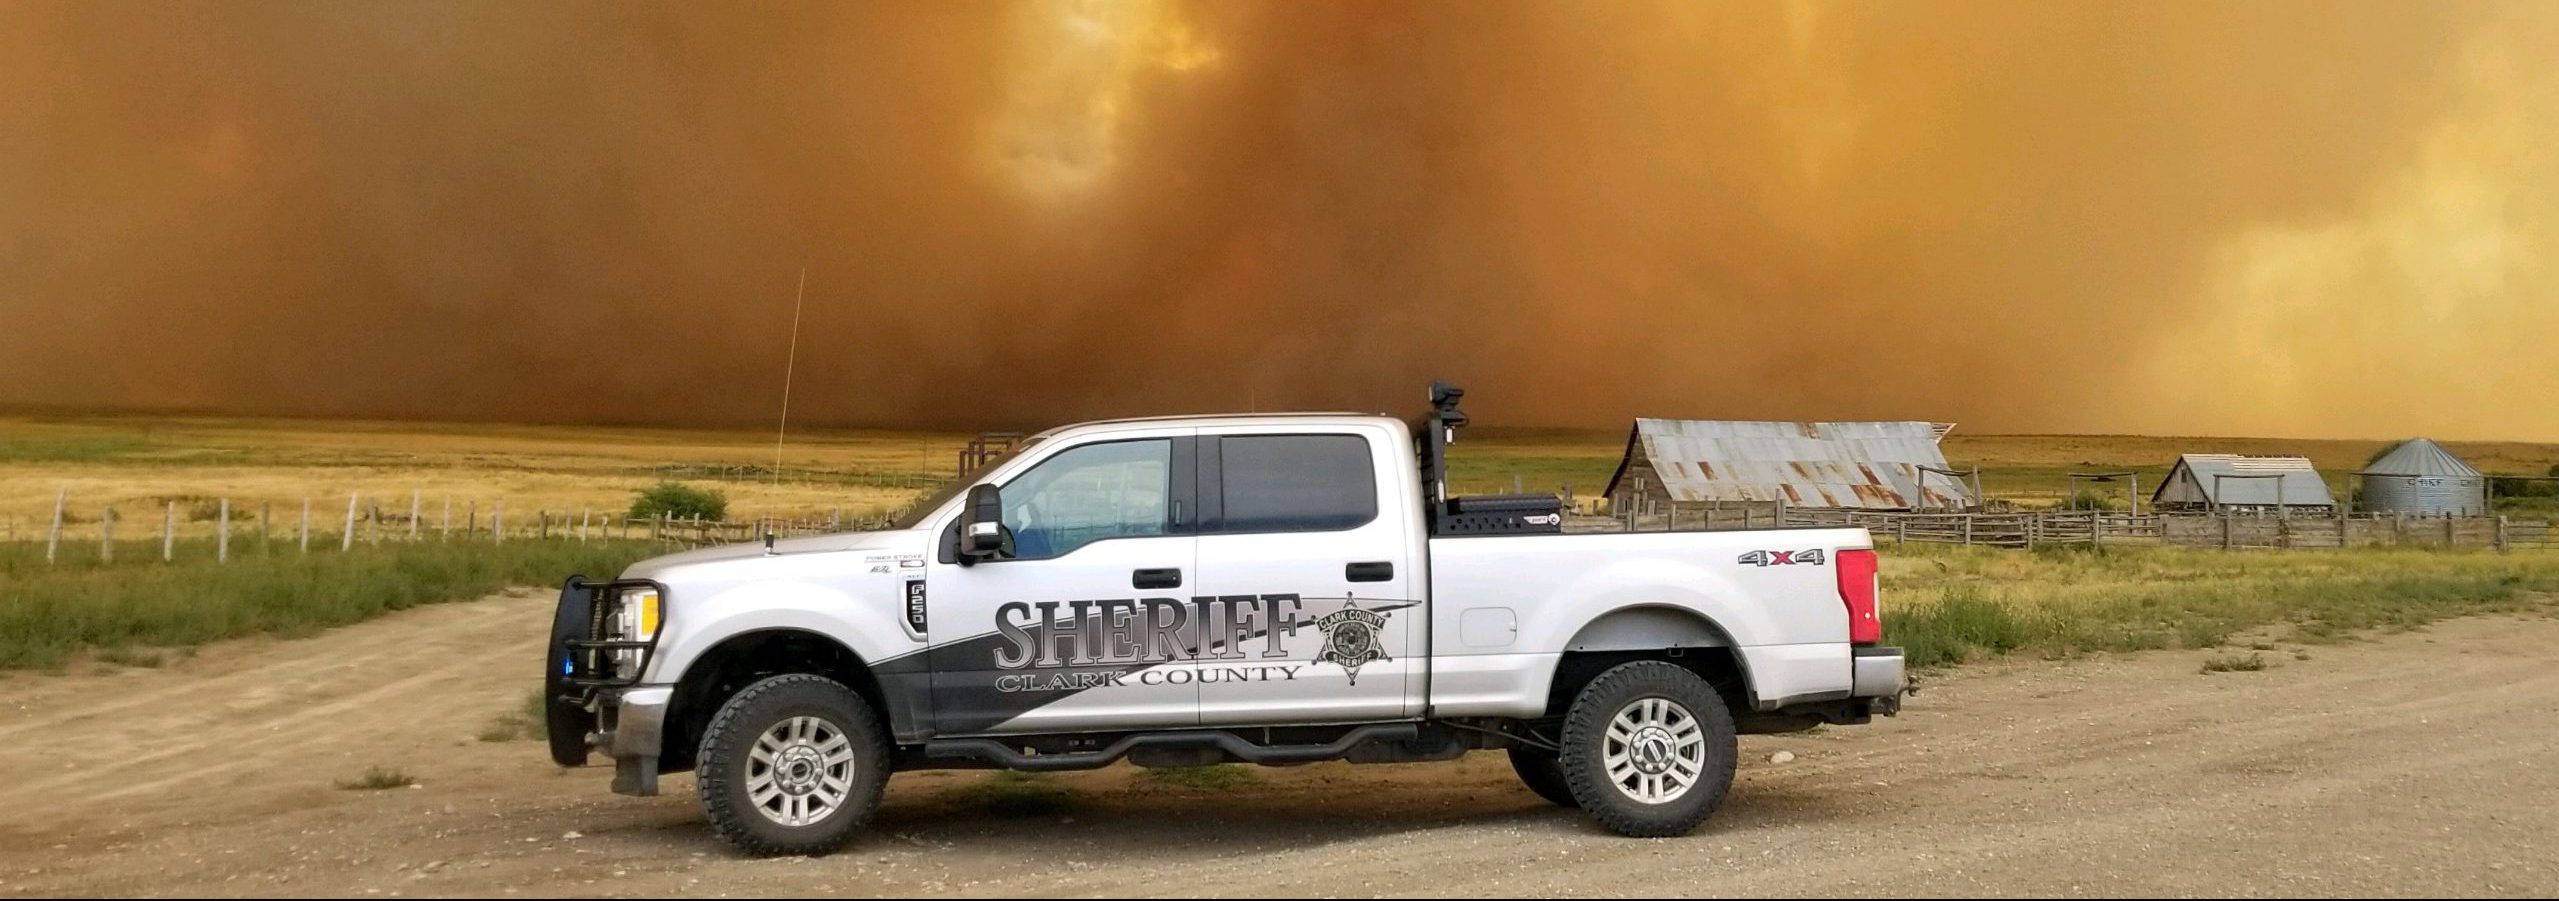 A truck in front of a large wall of fire